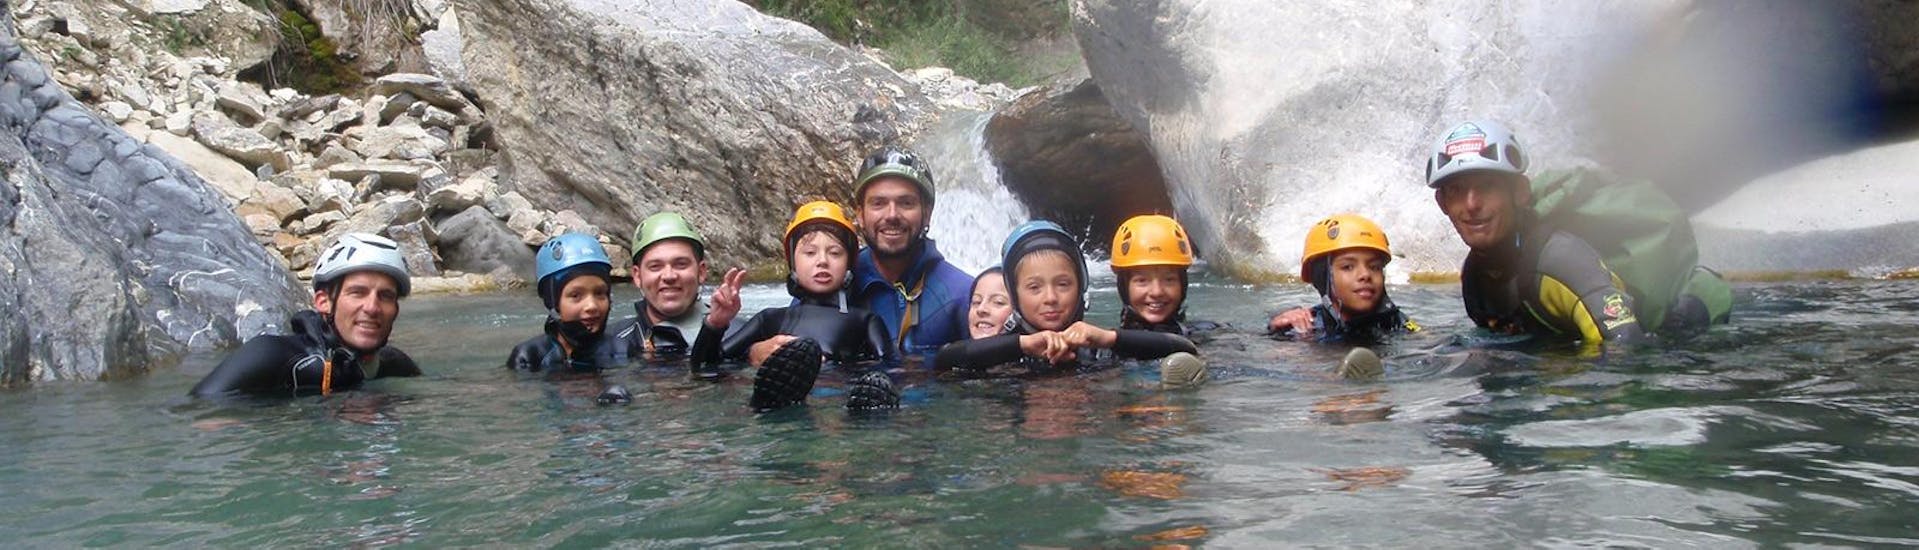 Gevorderde Canyoning in Briançon - Nationaal park Écrins.